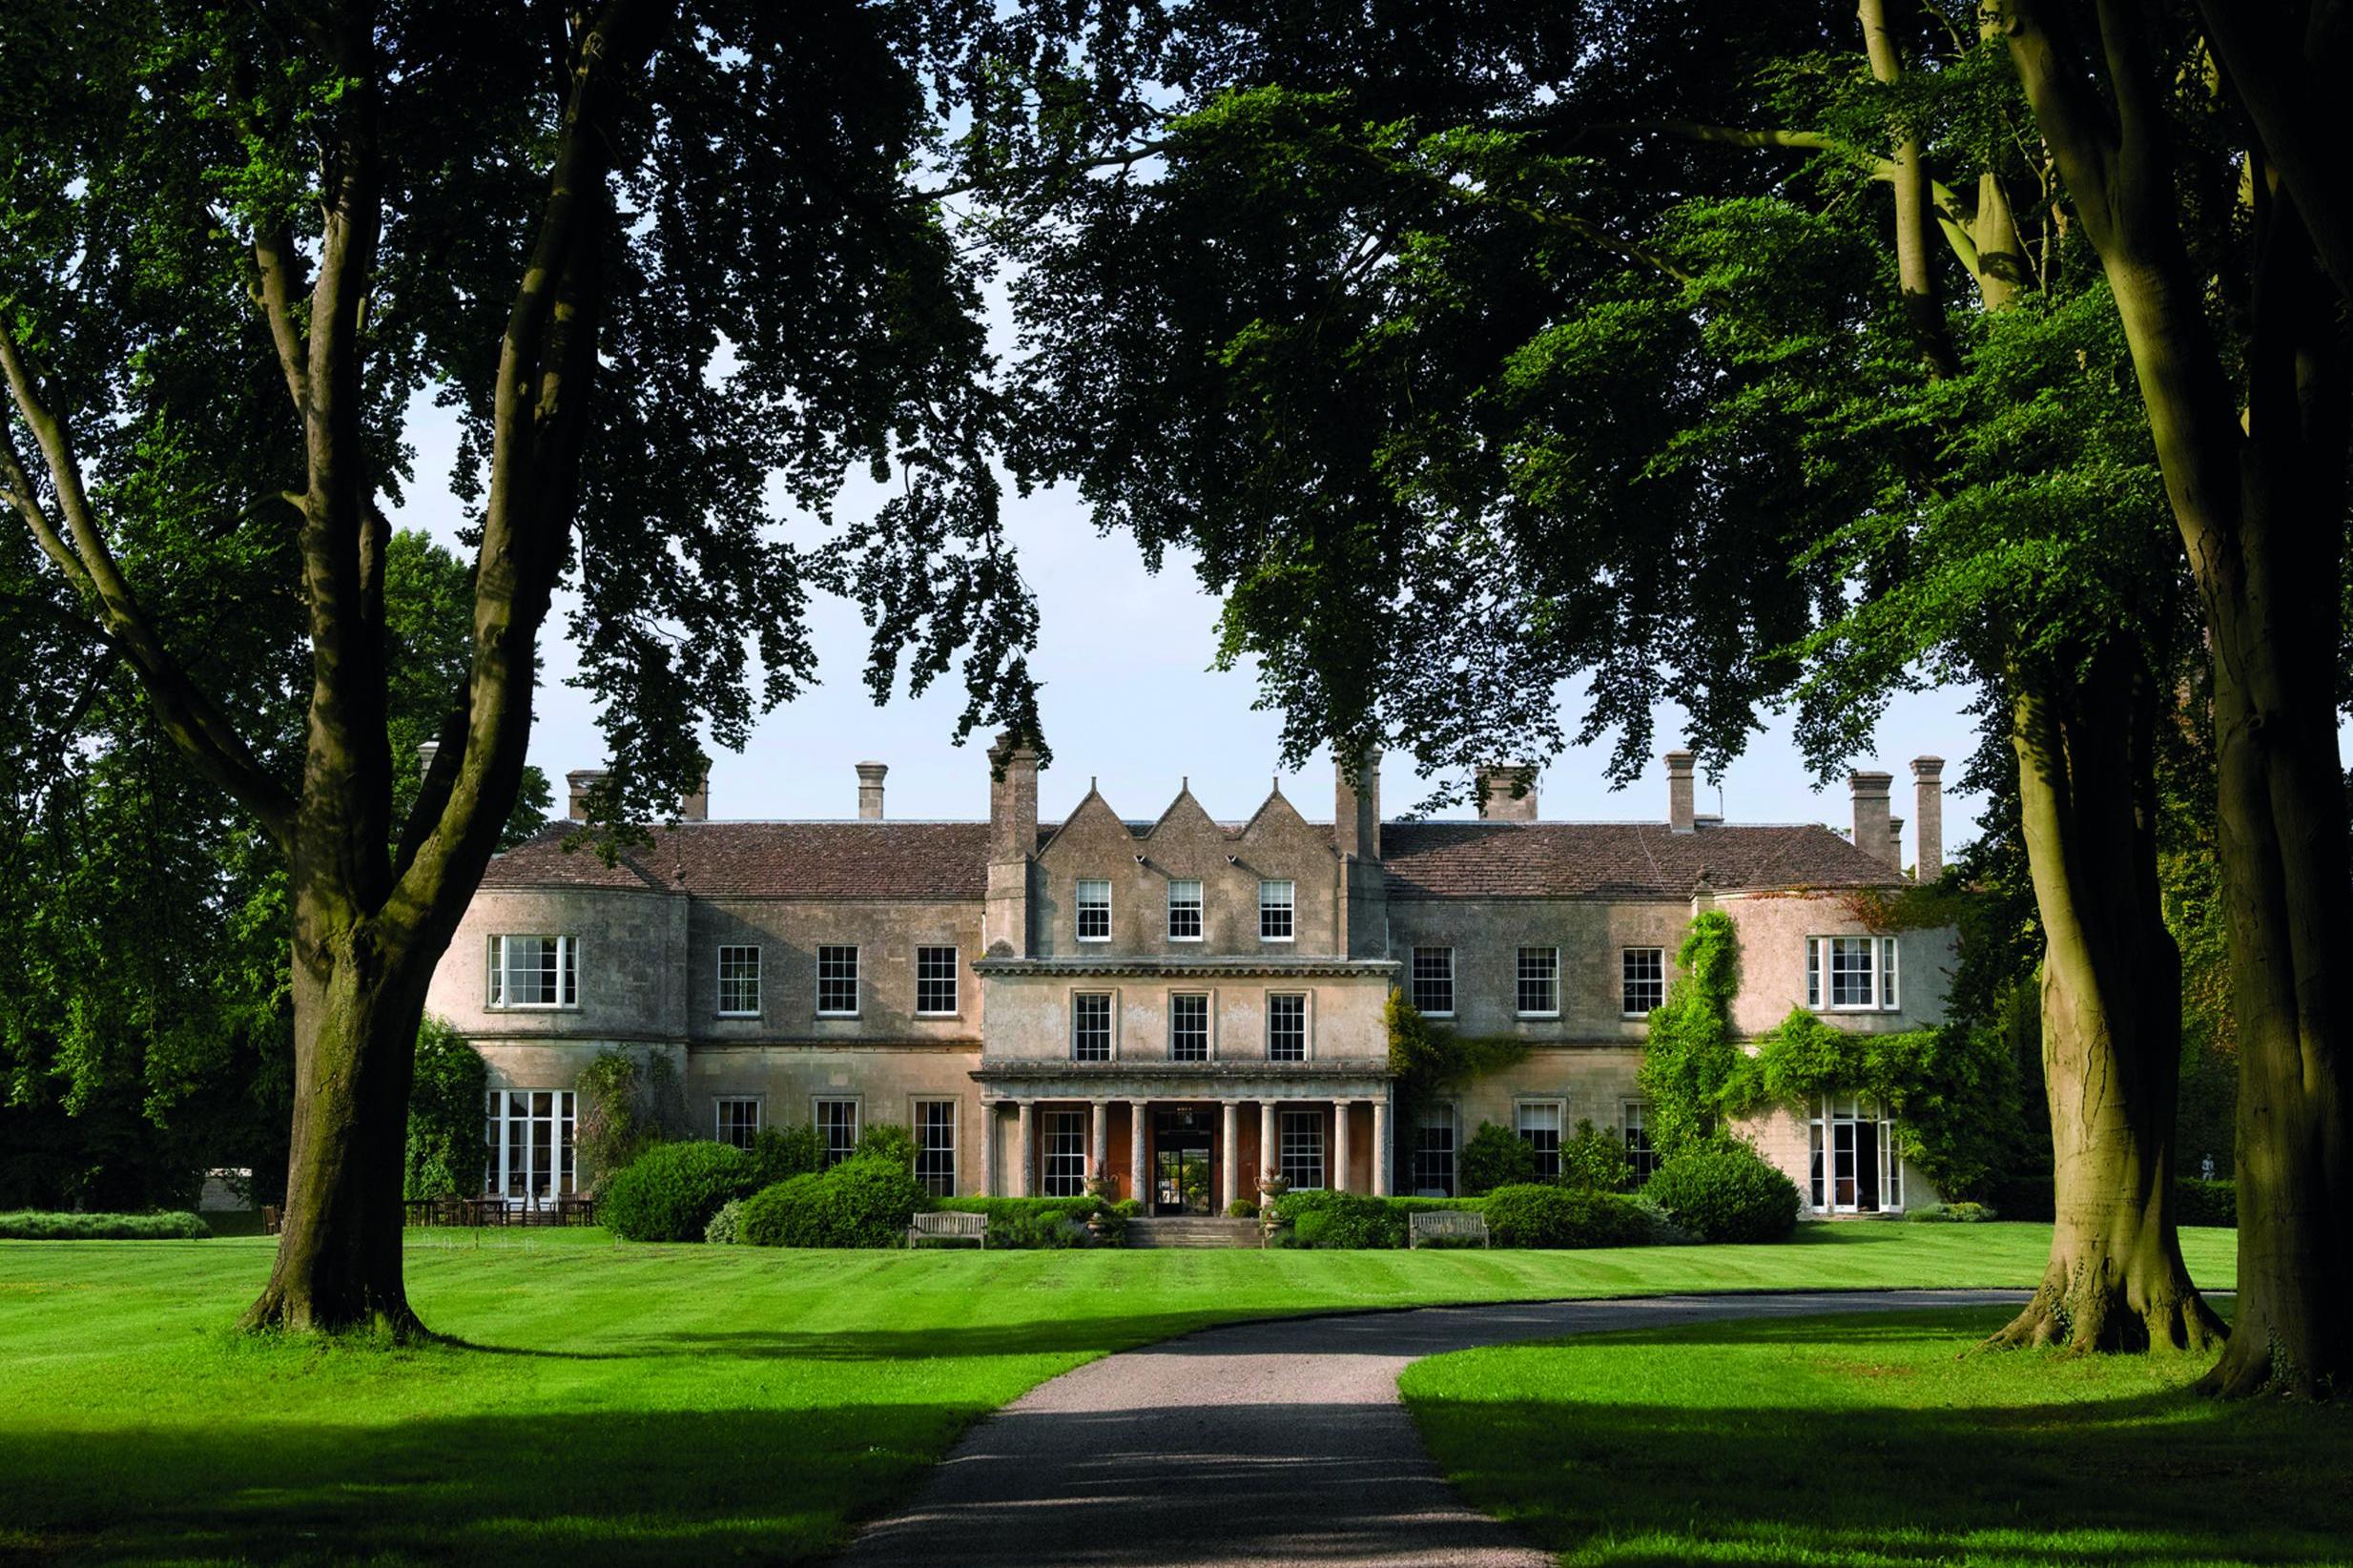 Set in a 500-acre estate, everything about the Lucknam is superlative